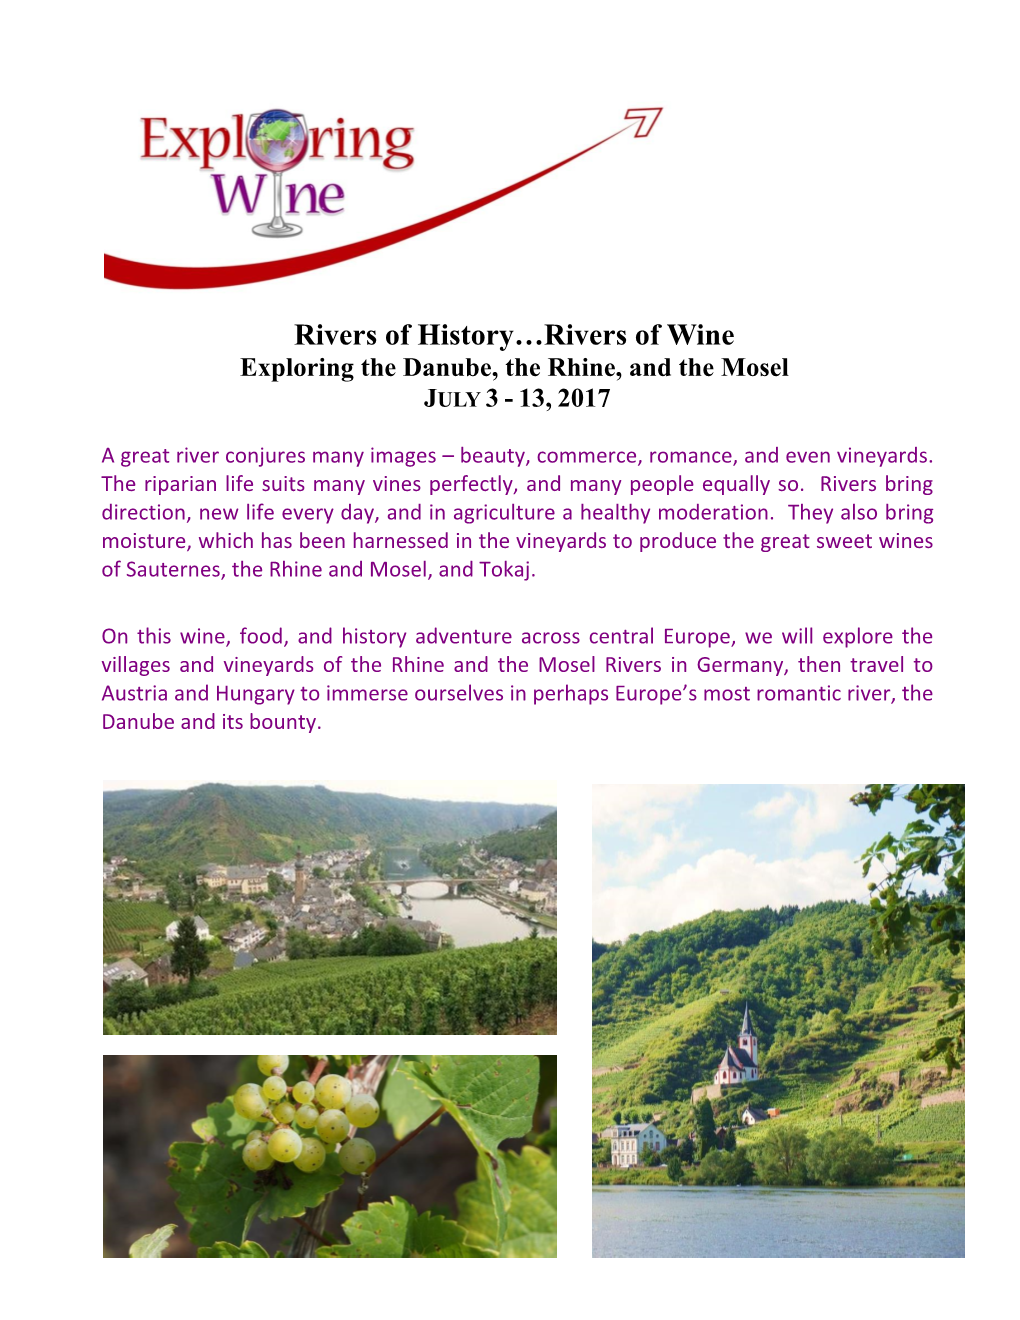 Rivers of Wine Exploring the Danube, the Rhine, and the Mosel JULY 3 - 13, 2017